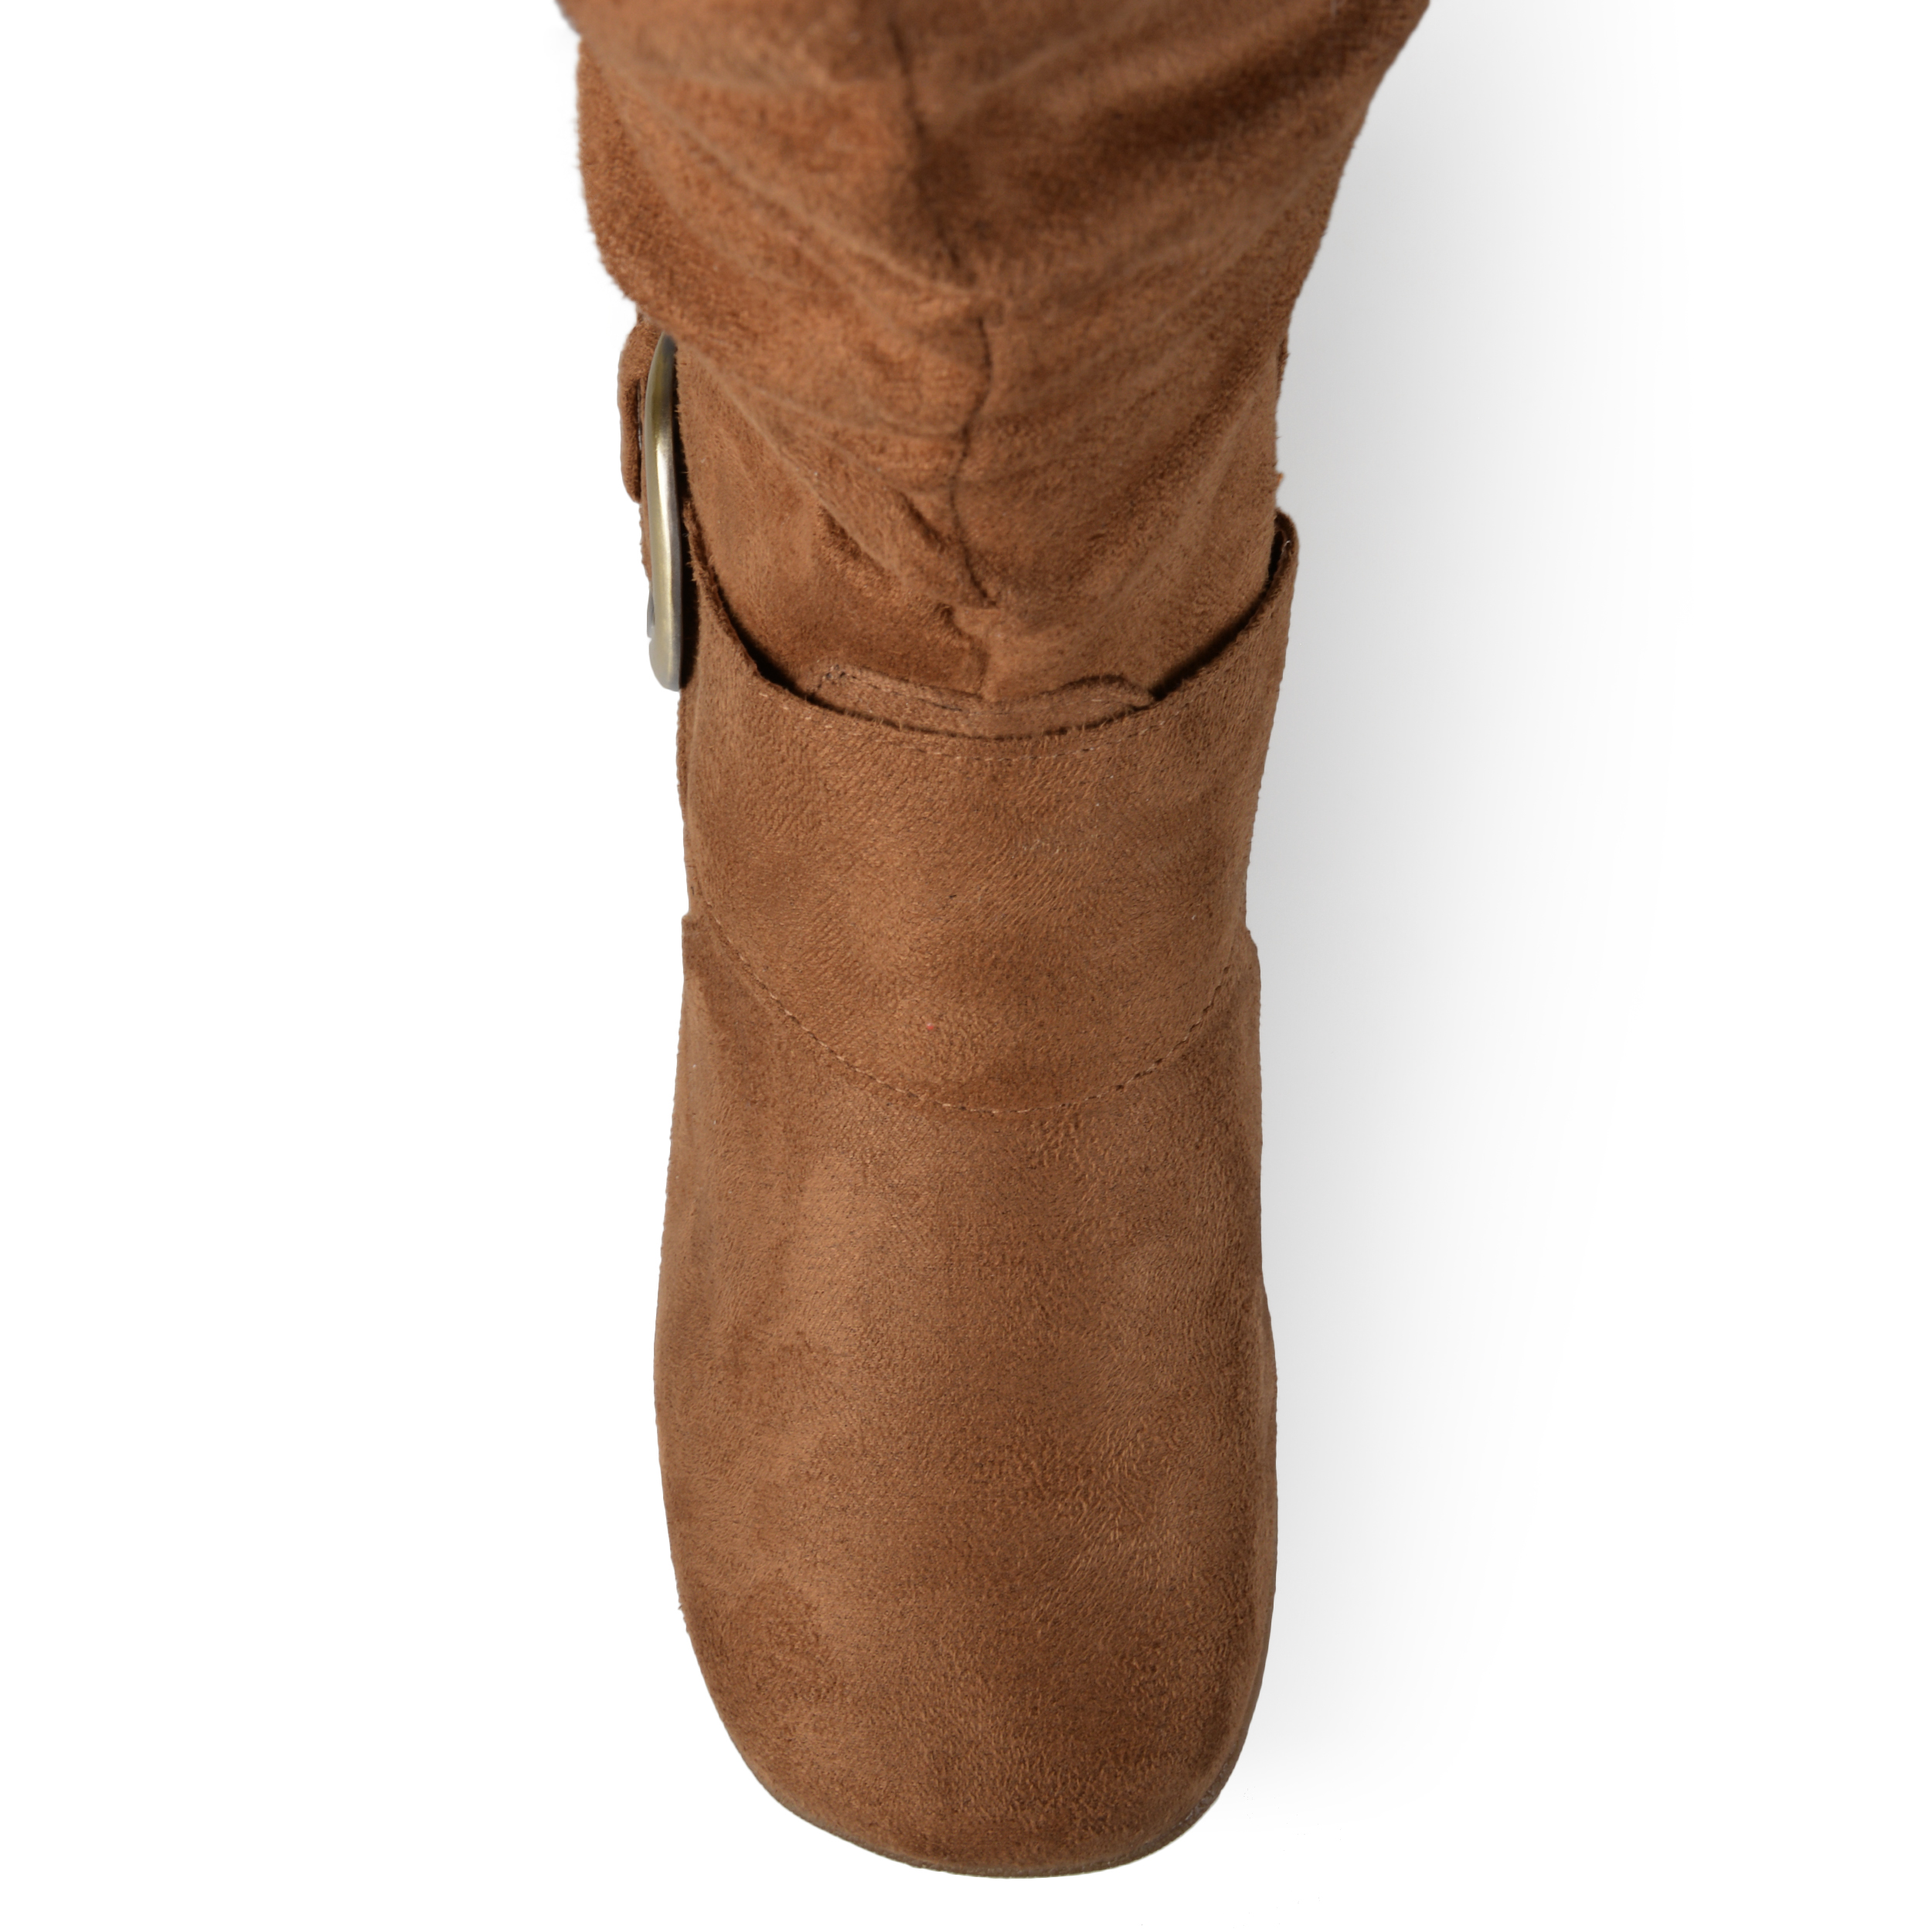 Women's August Slouchy Wide Calf Boots - image 5 of 8